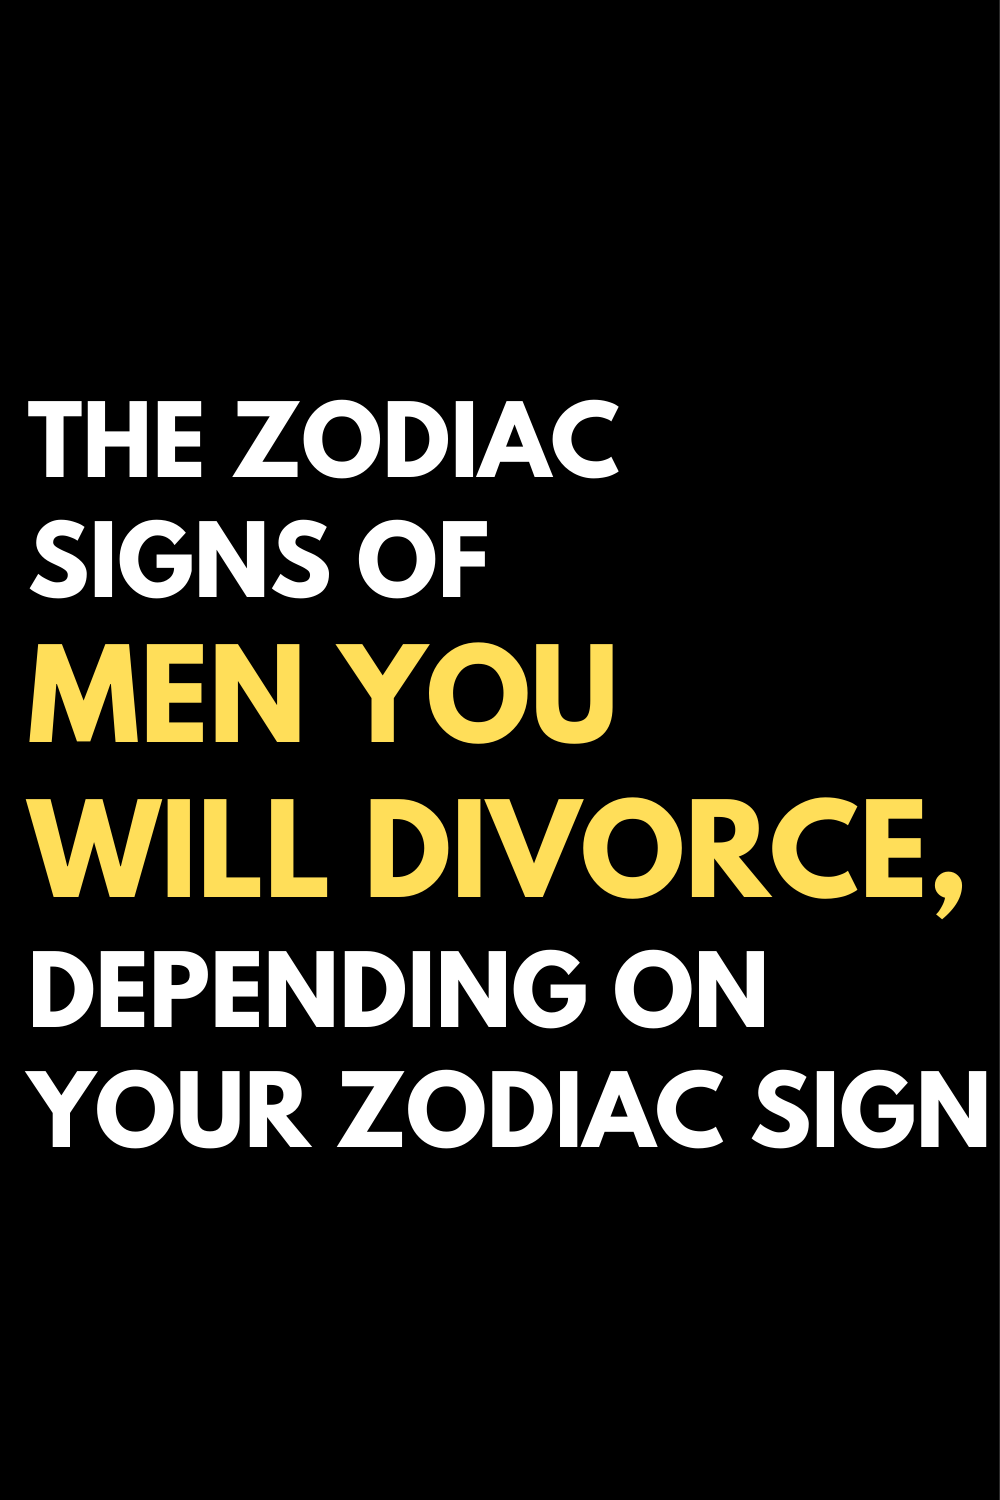 The zodiac signs of men you will divorce, depending on your zodiac sign